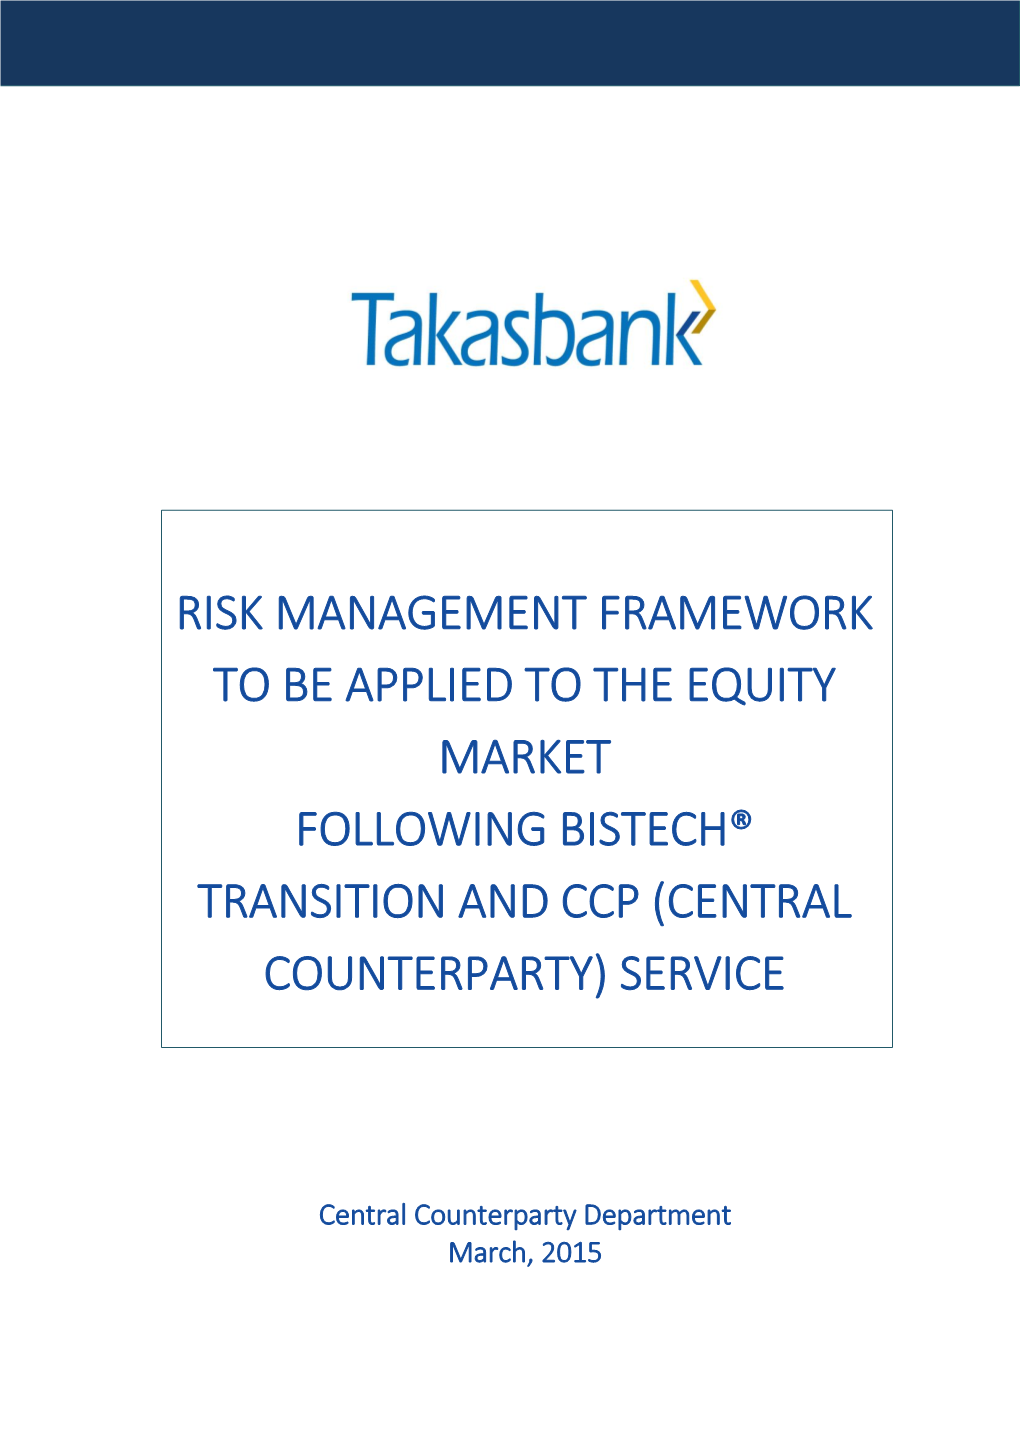 Risk Management Framework to Be Applied To